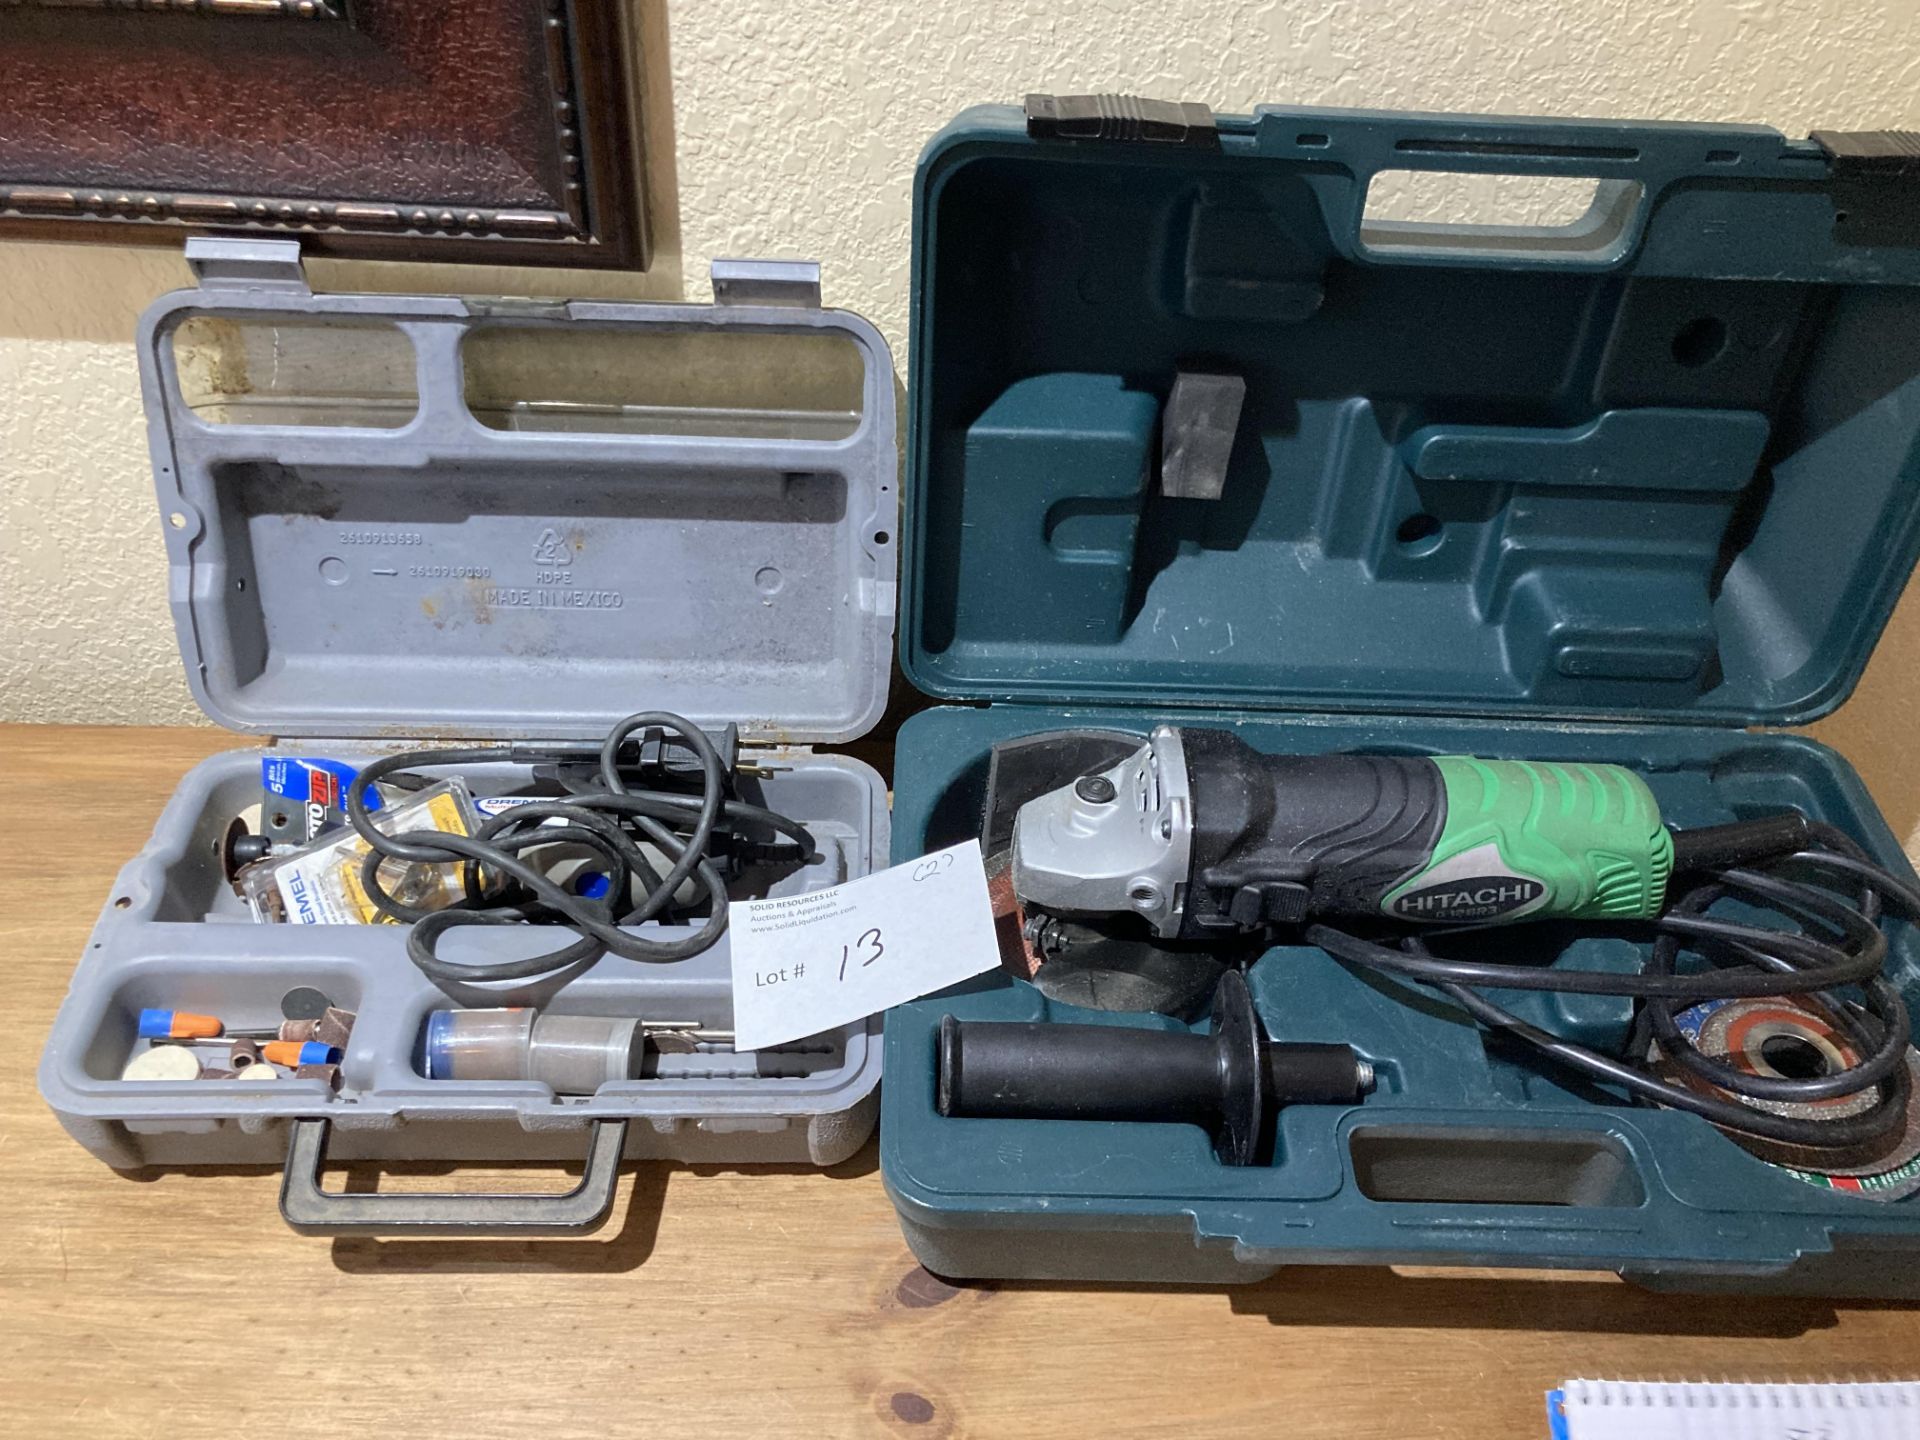 LOT OF: (1) Hitachi G12SR3 Grinder with handle and case, and (1) Dremel multi-pro Model 395